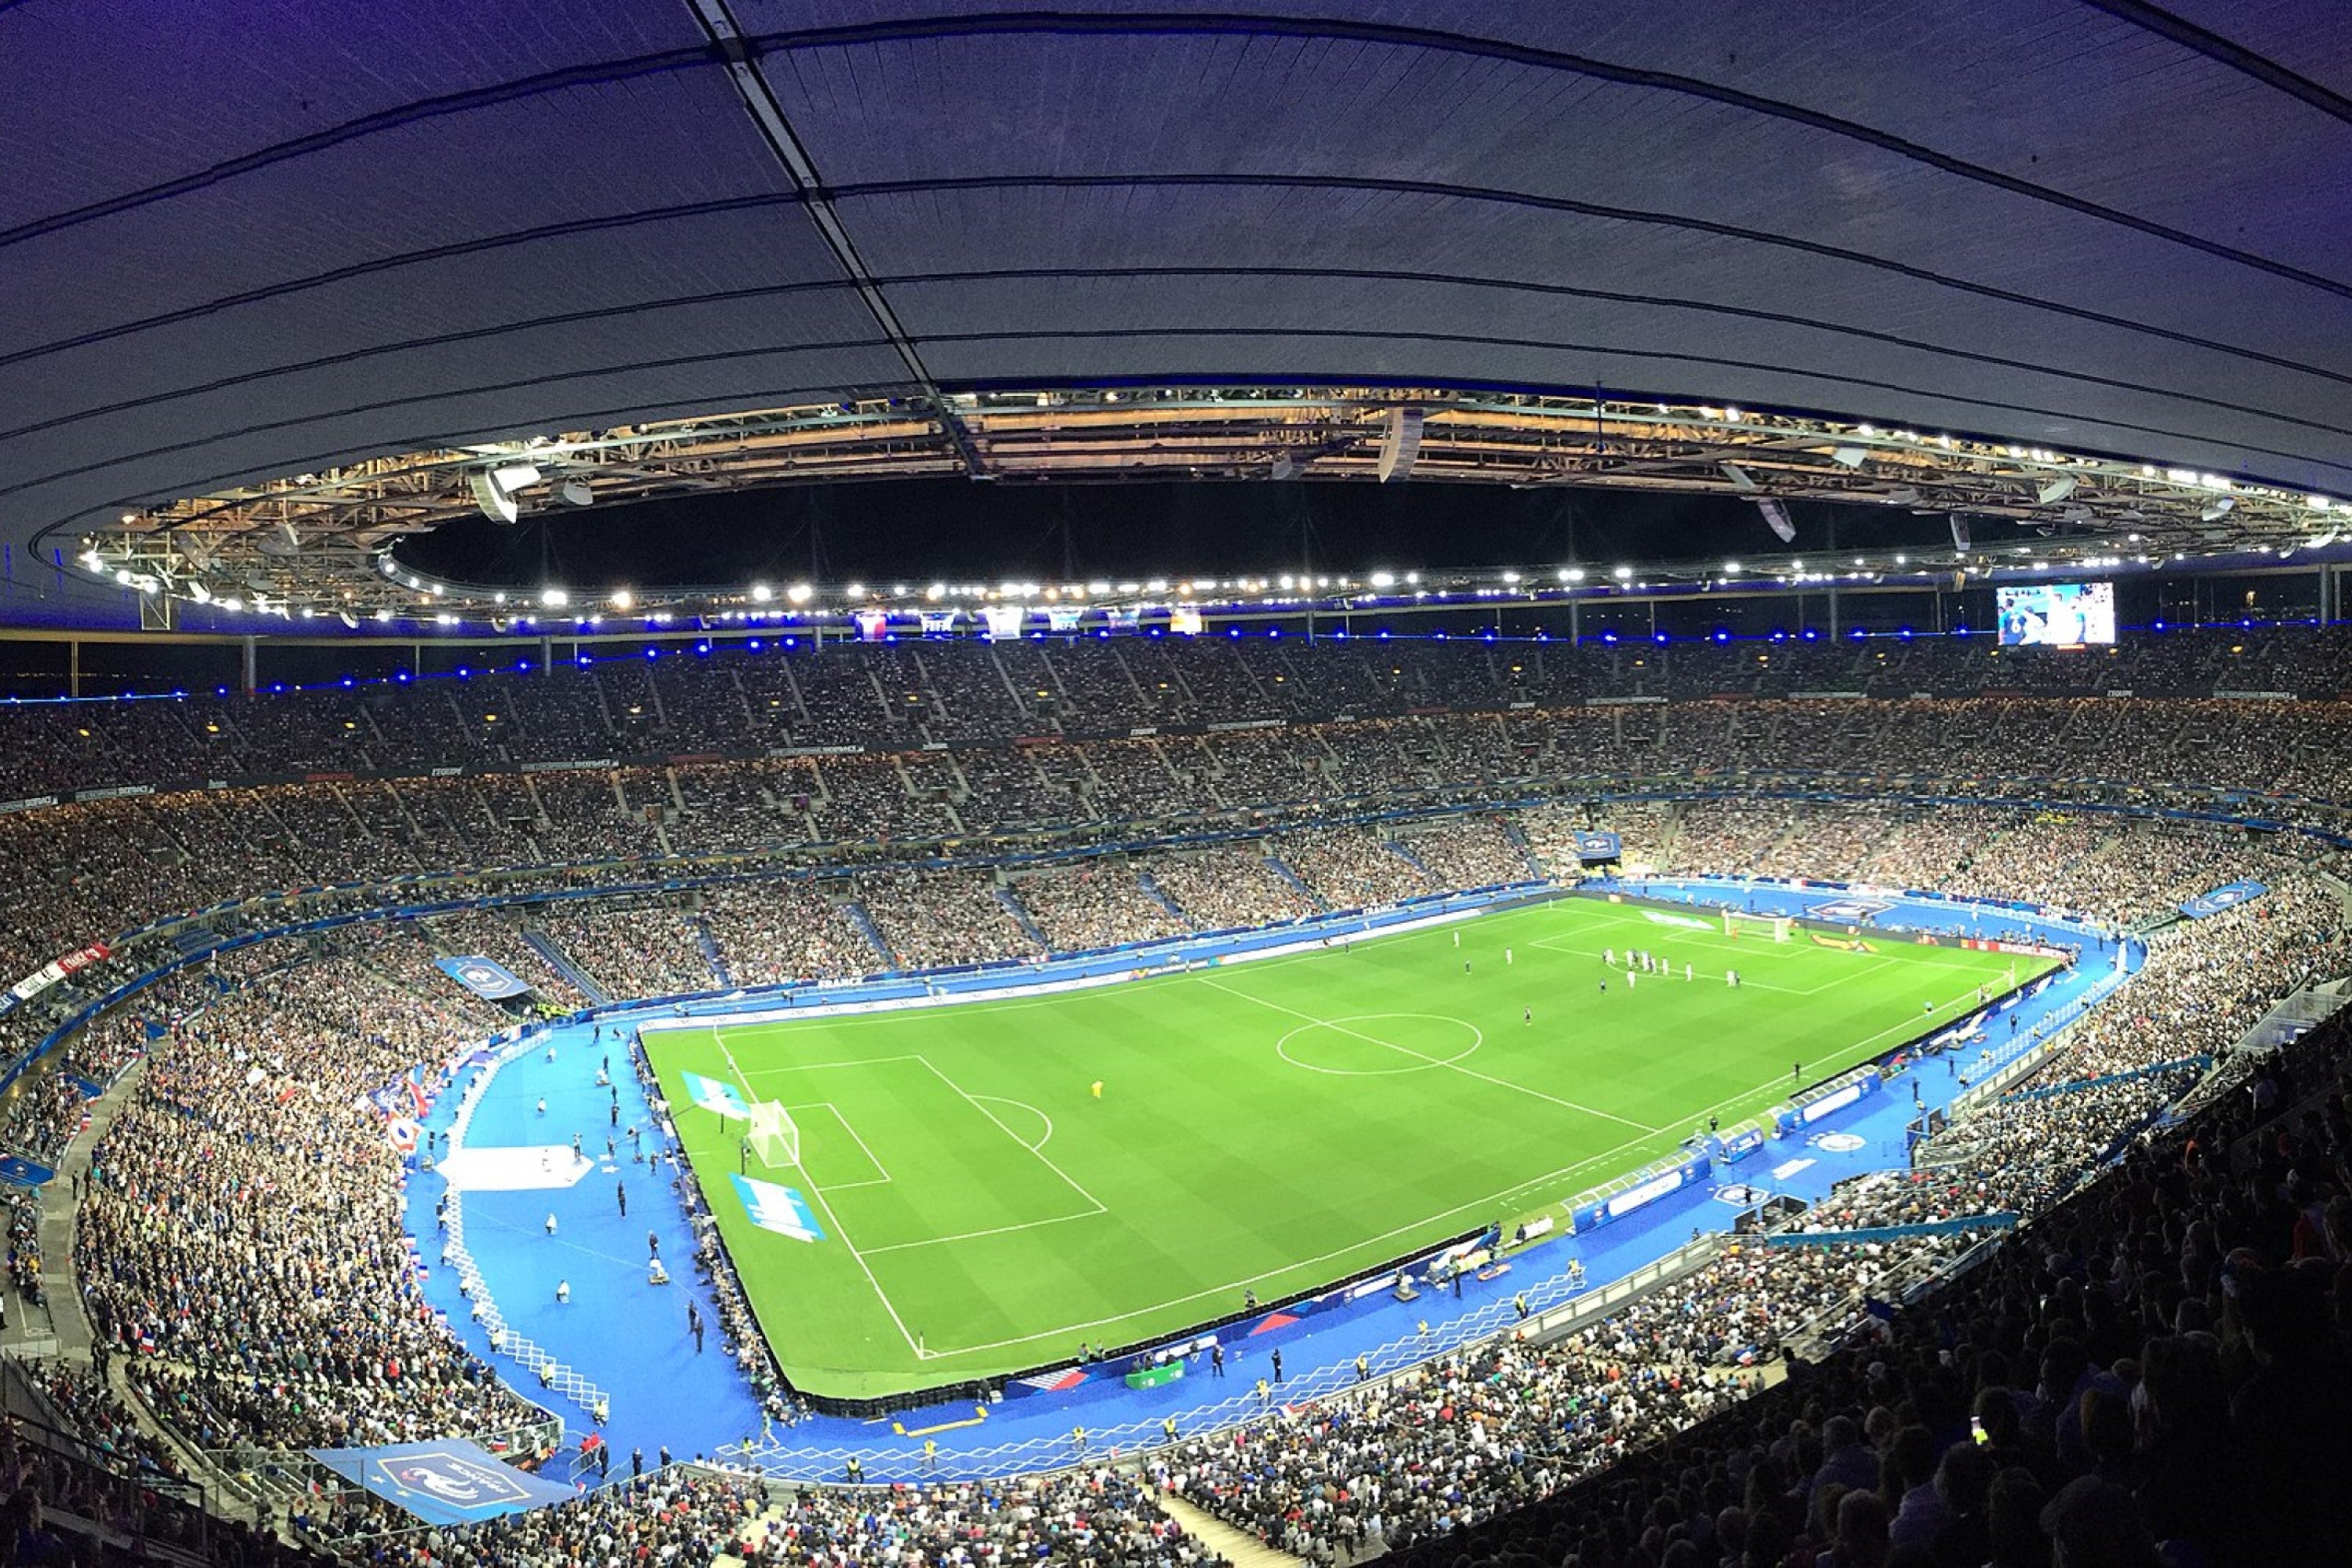 The Stade de France will host the 2022 UEFA Champions League Final